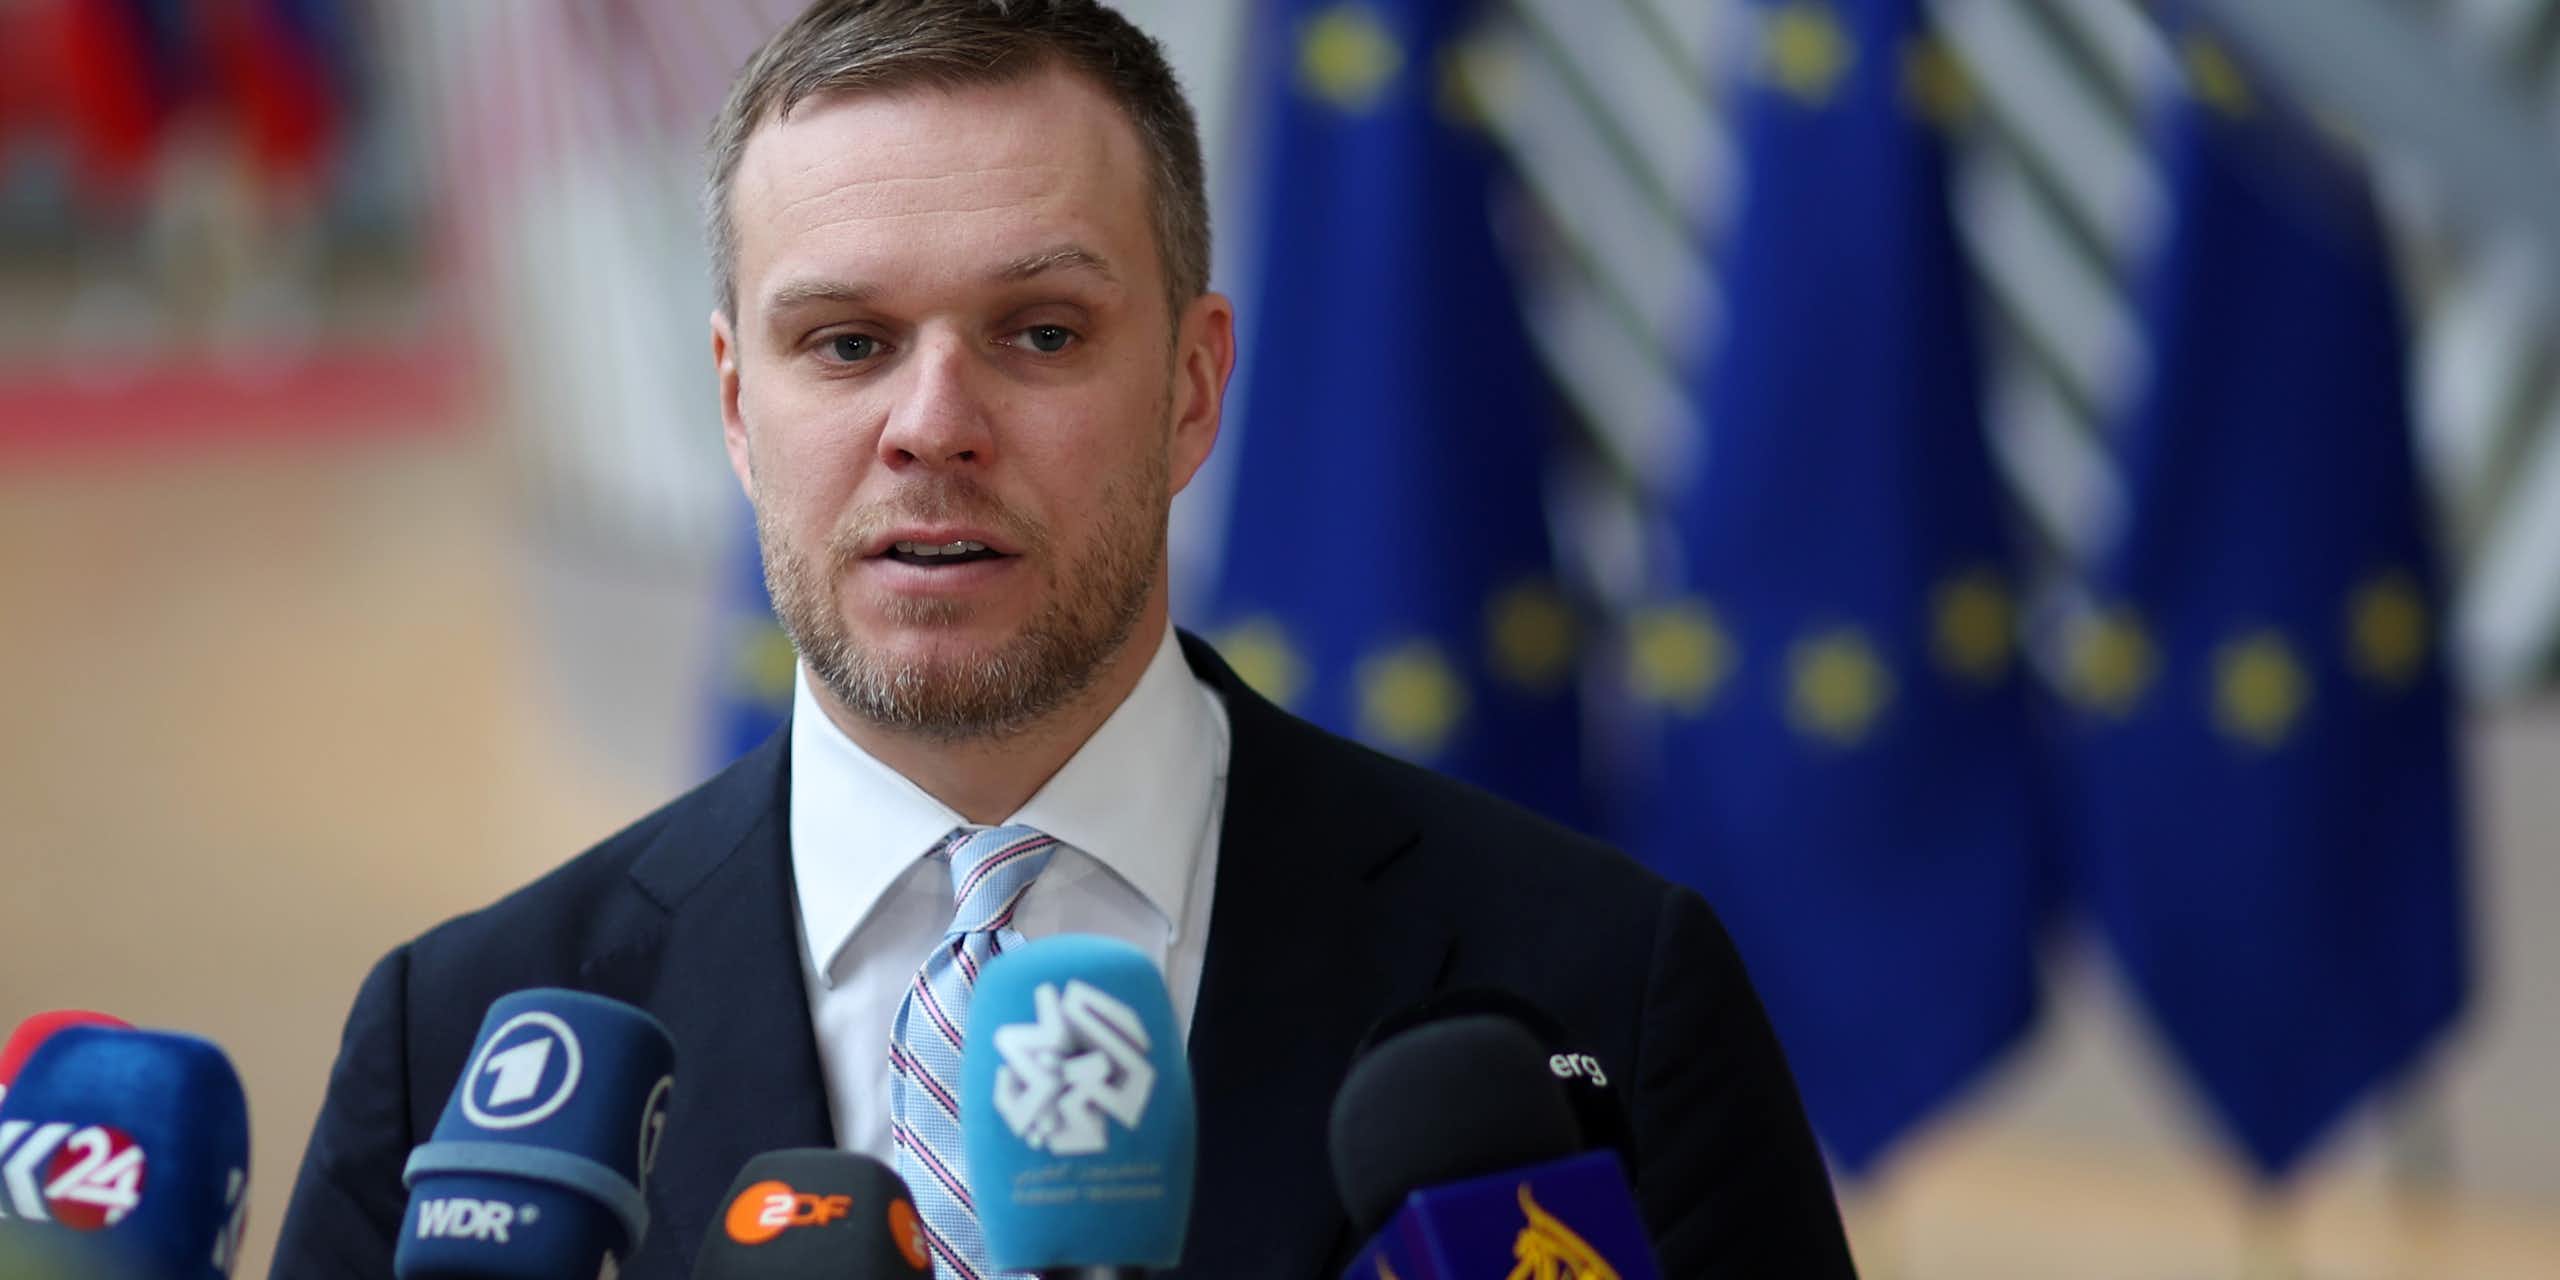 Gabrielius Landsbergis speaking into multiple microphones at a press conference with European flags in the background. 